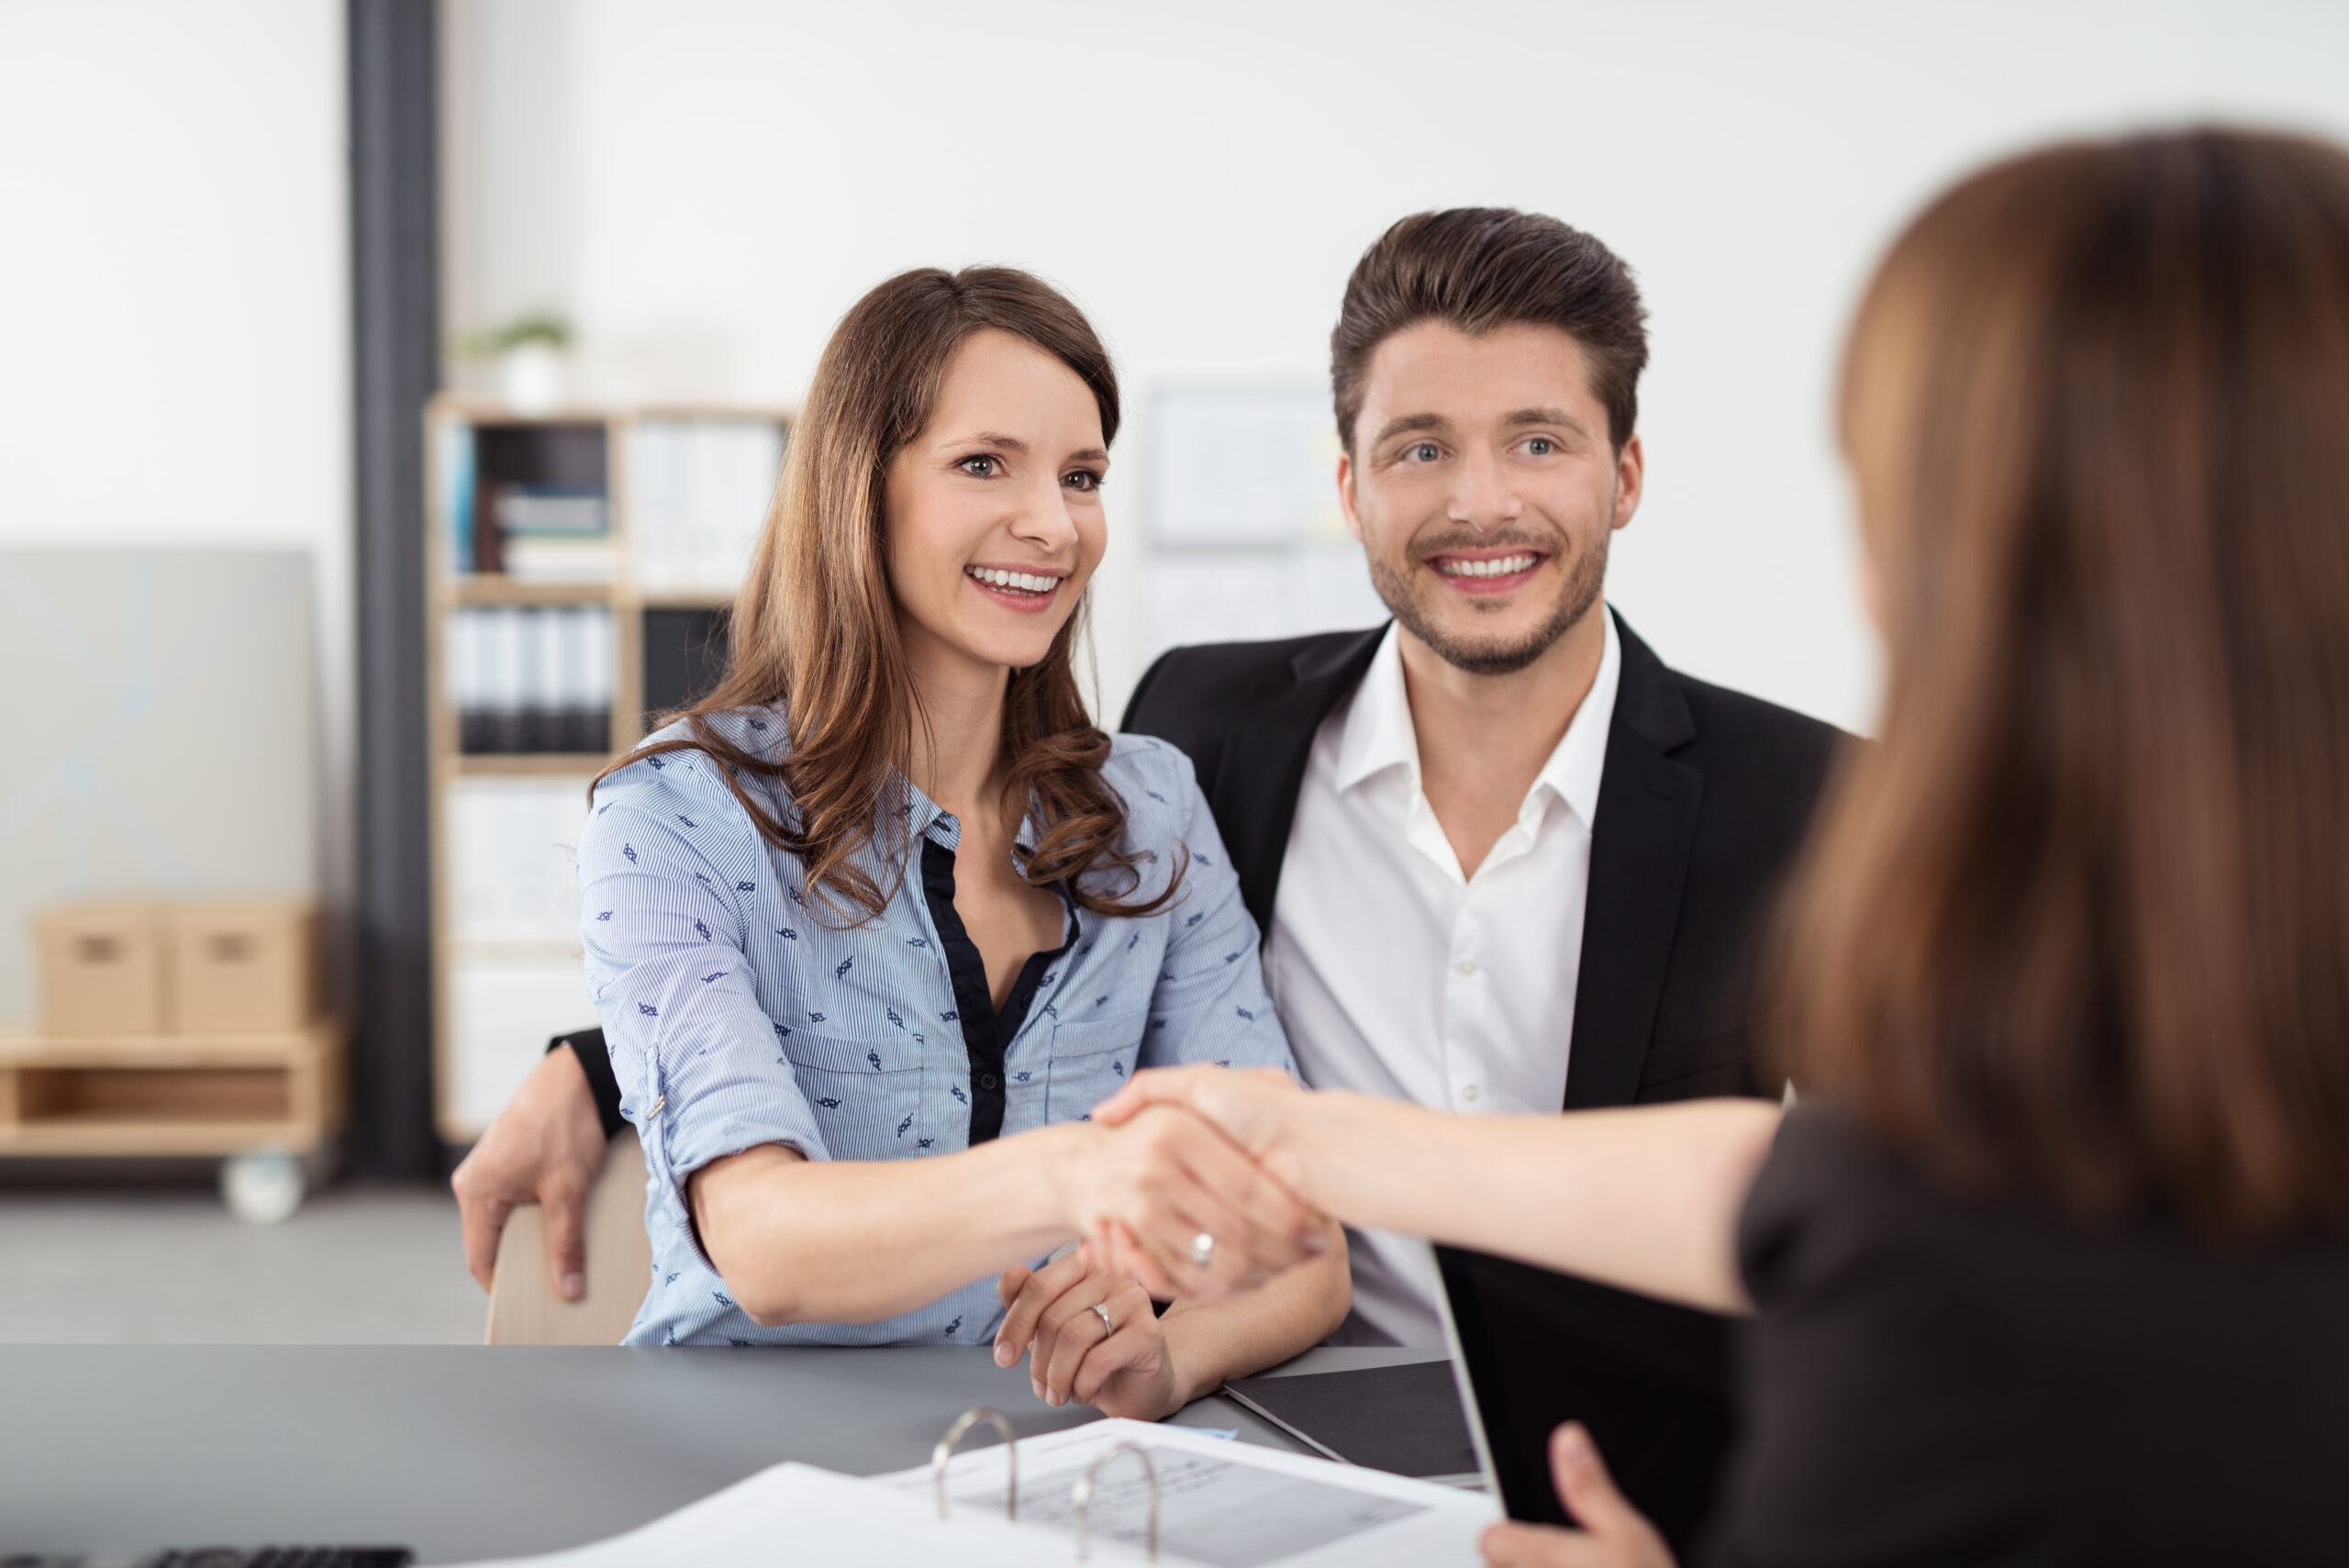 Two people shaking hands in an office after finalizing a lease agreement.